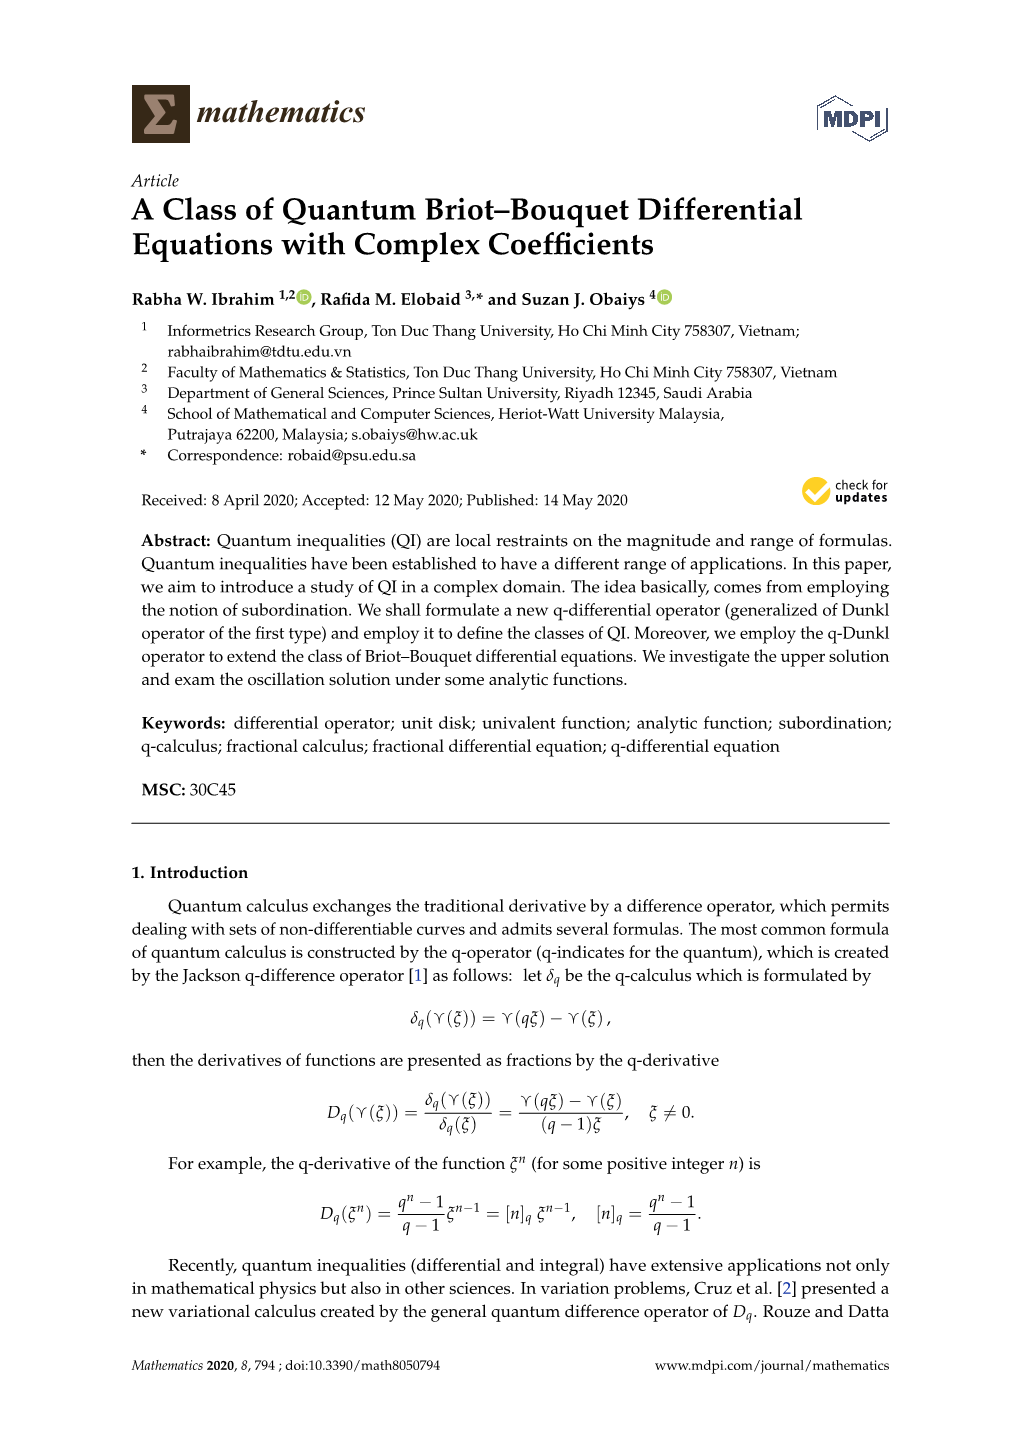 A Class of Quantum Briot–Bouquet Differential Equations with Complex Coefficients